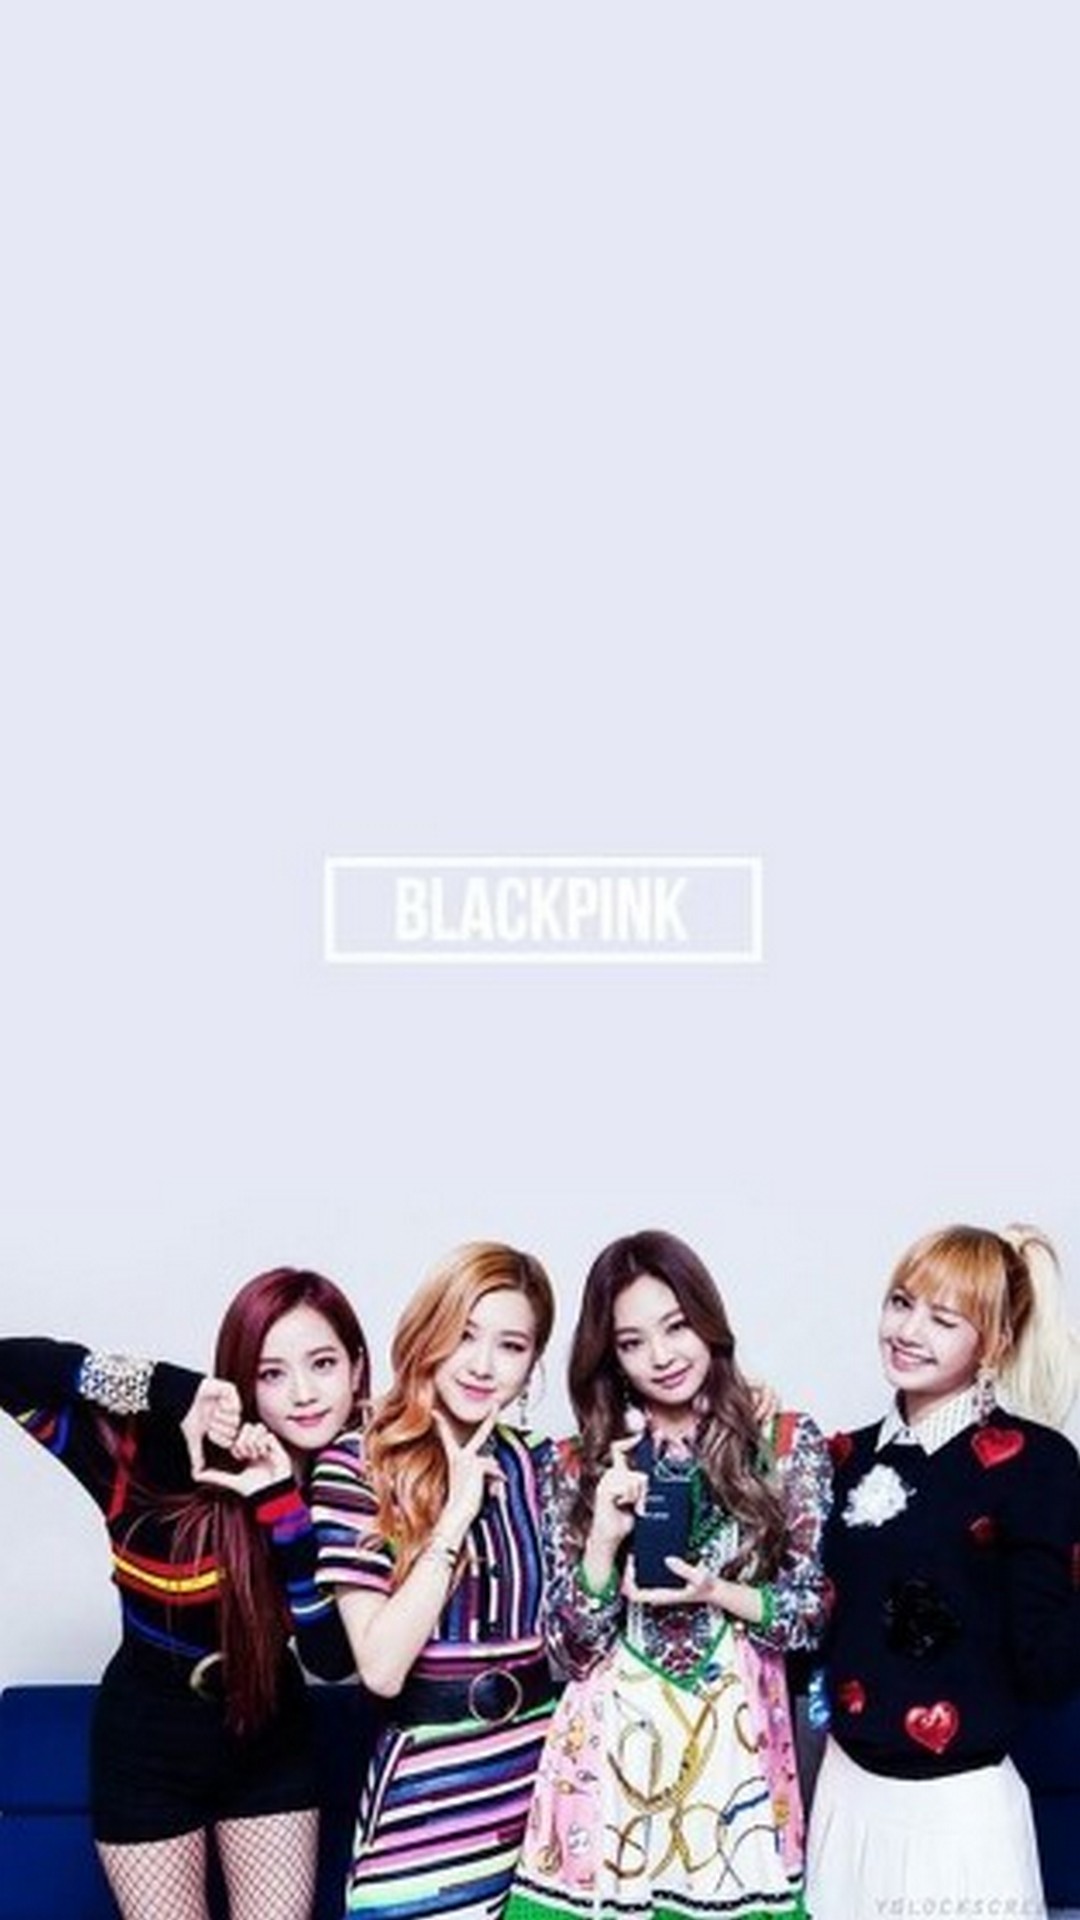 Blackpink Backgrounds For Android With high-resolution 1080X1920 pixel. You can use this wallpaper for your Android backgrounds, Tablet, Samsung Screensavers, Mobile Phone Lock Screen and another Smartphones device